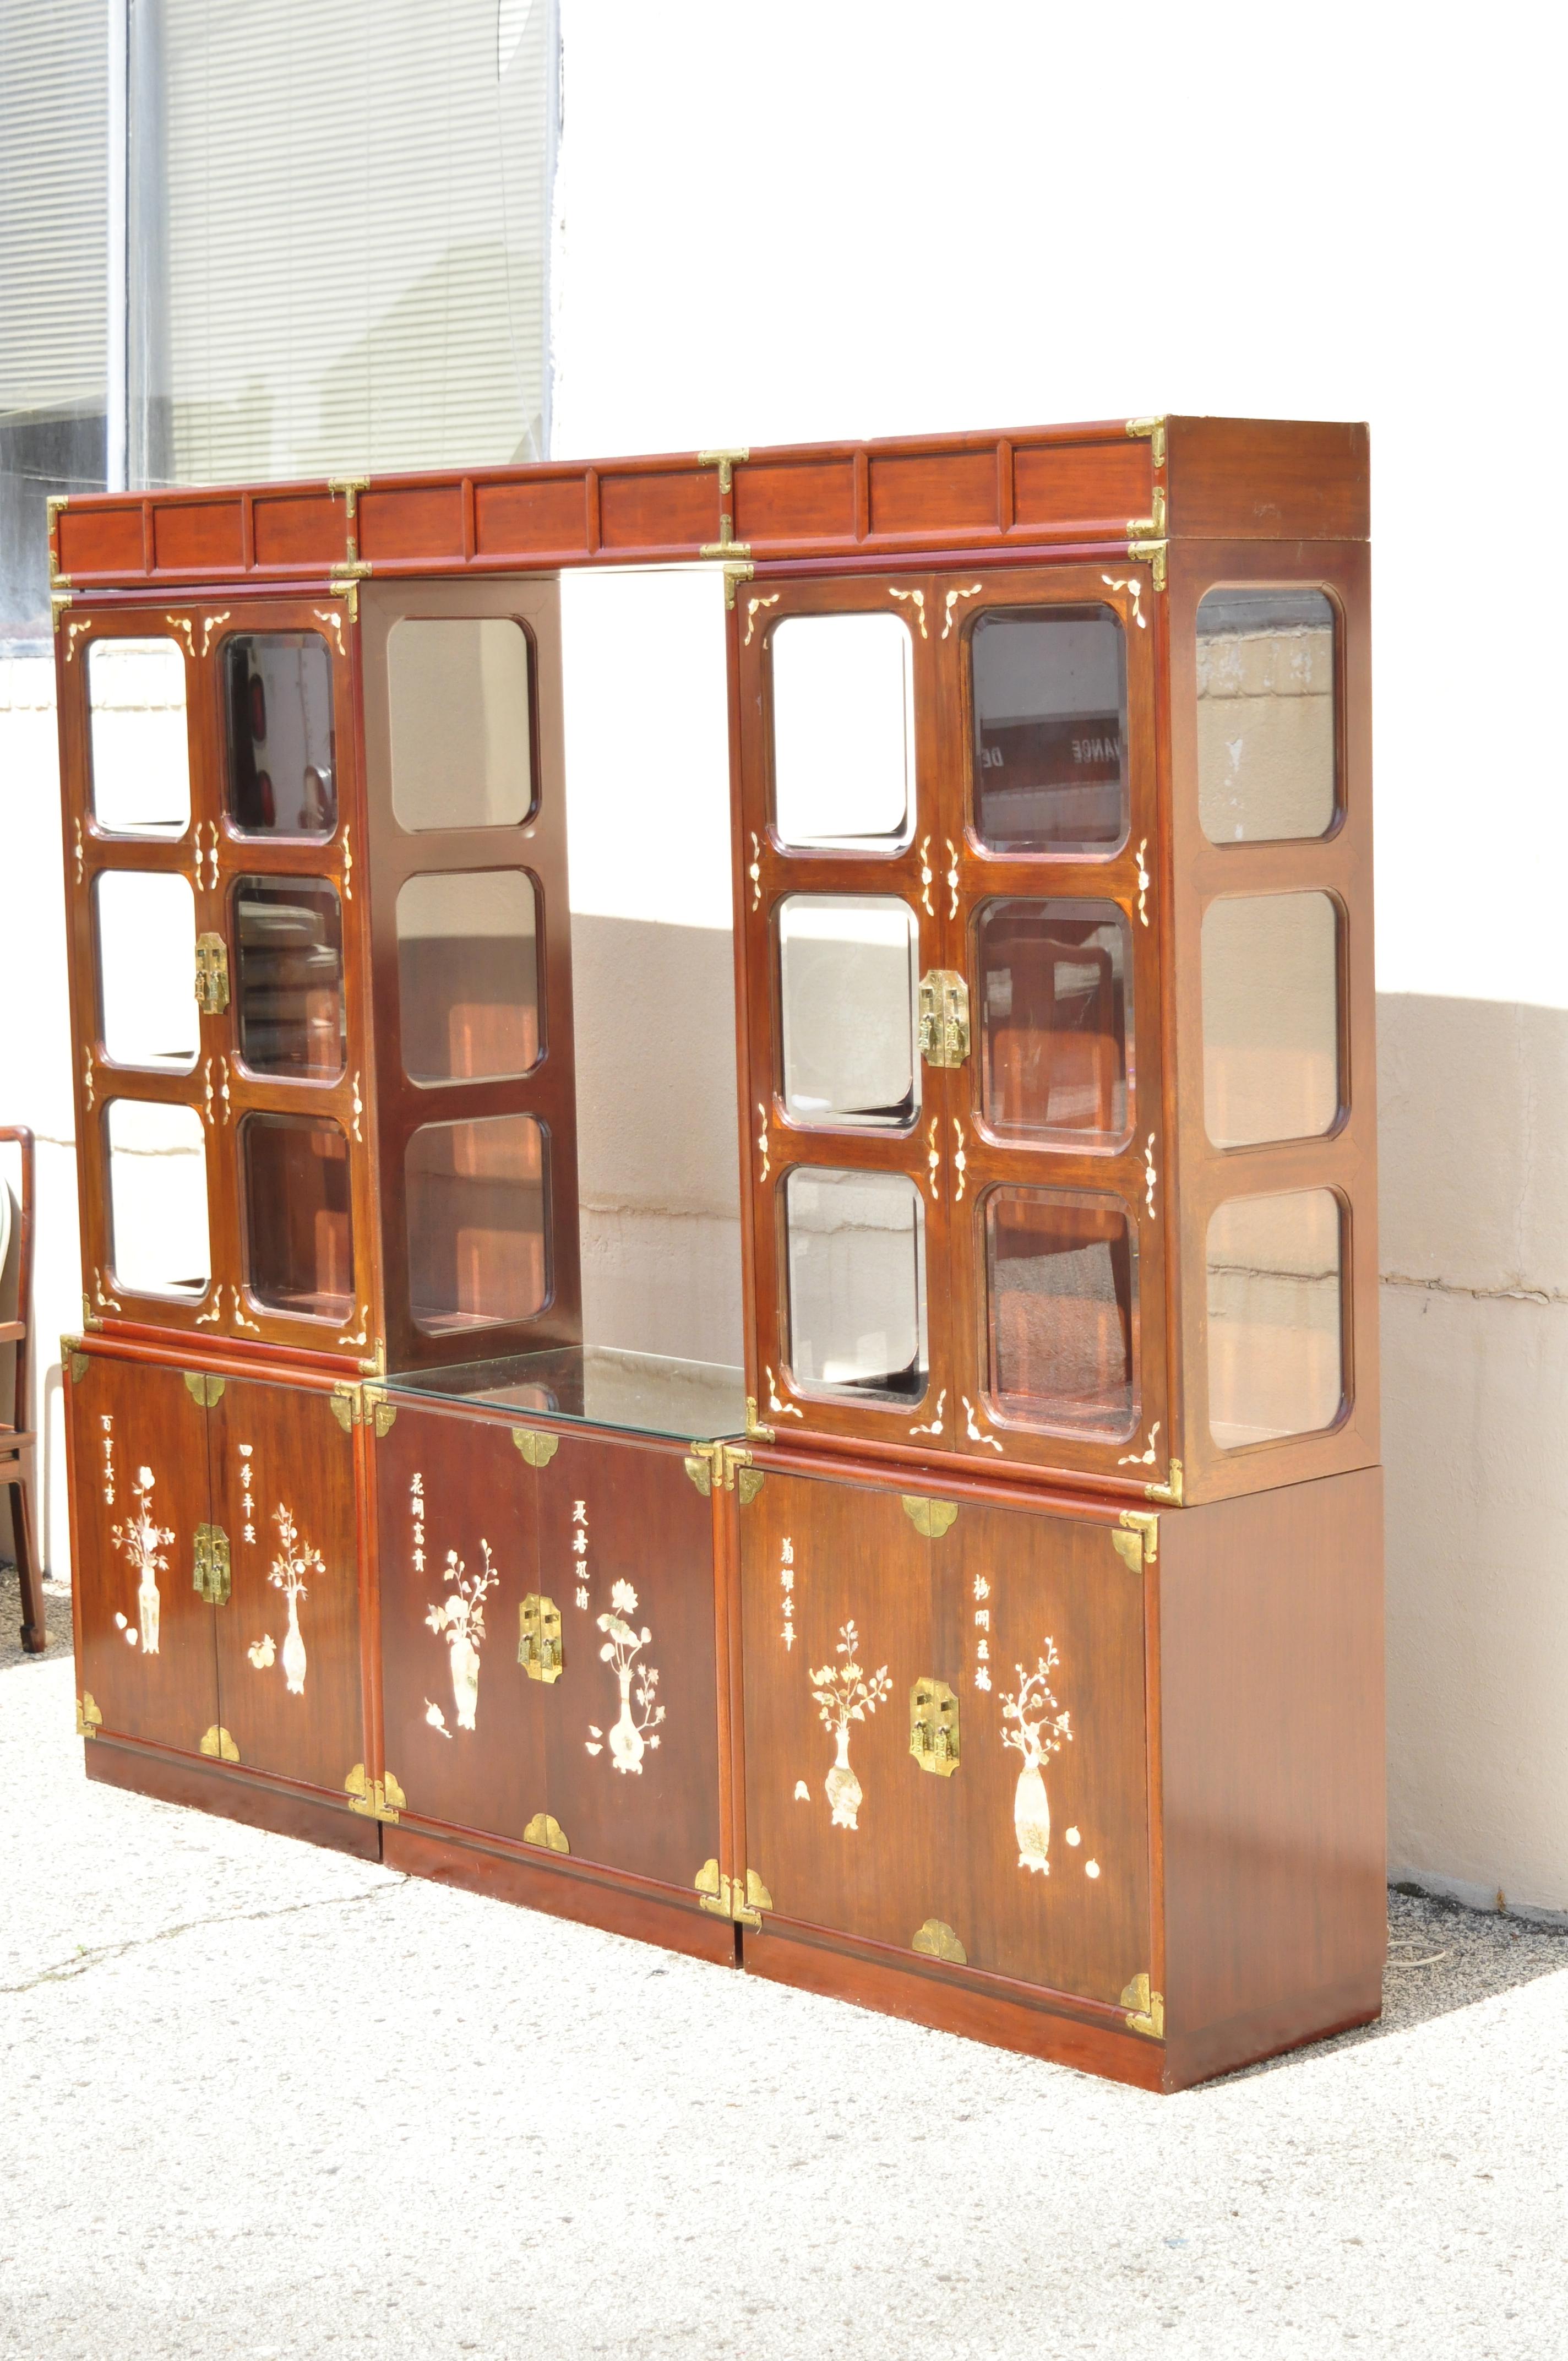 Asian mother of pearl rosewood cherry large China cabinet curio display wall unit. Item features large impressive size, mother of pearl inlay throughout, 2 upper display cabinets, 3 lower storage cabinets, one cabinet with 3 drawers, upper pediment